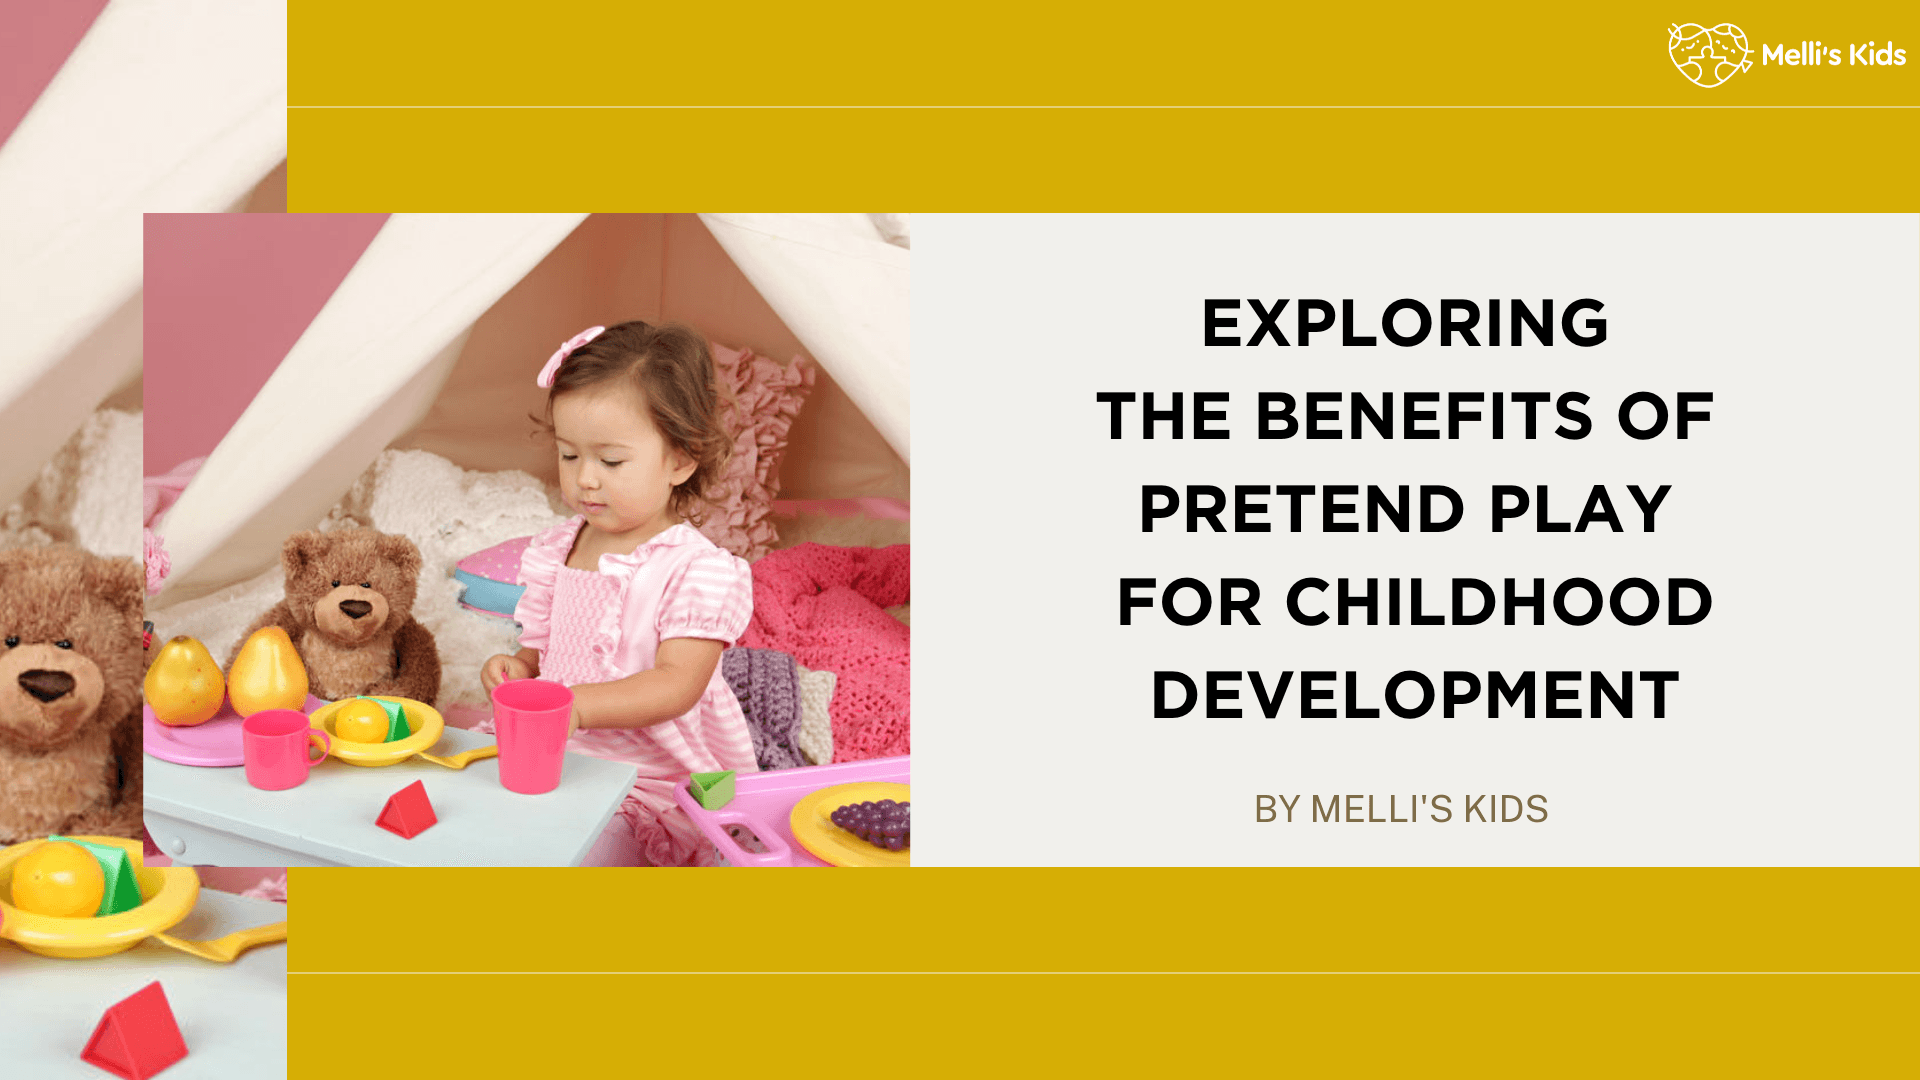 The benefits of pretend play for childhood development - Melli's Kids